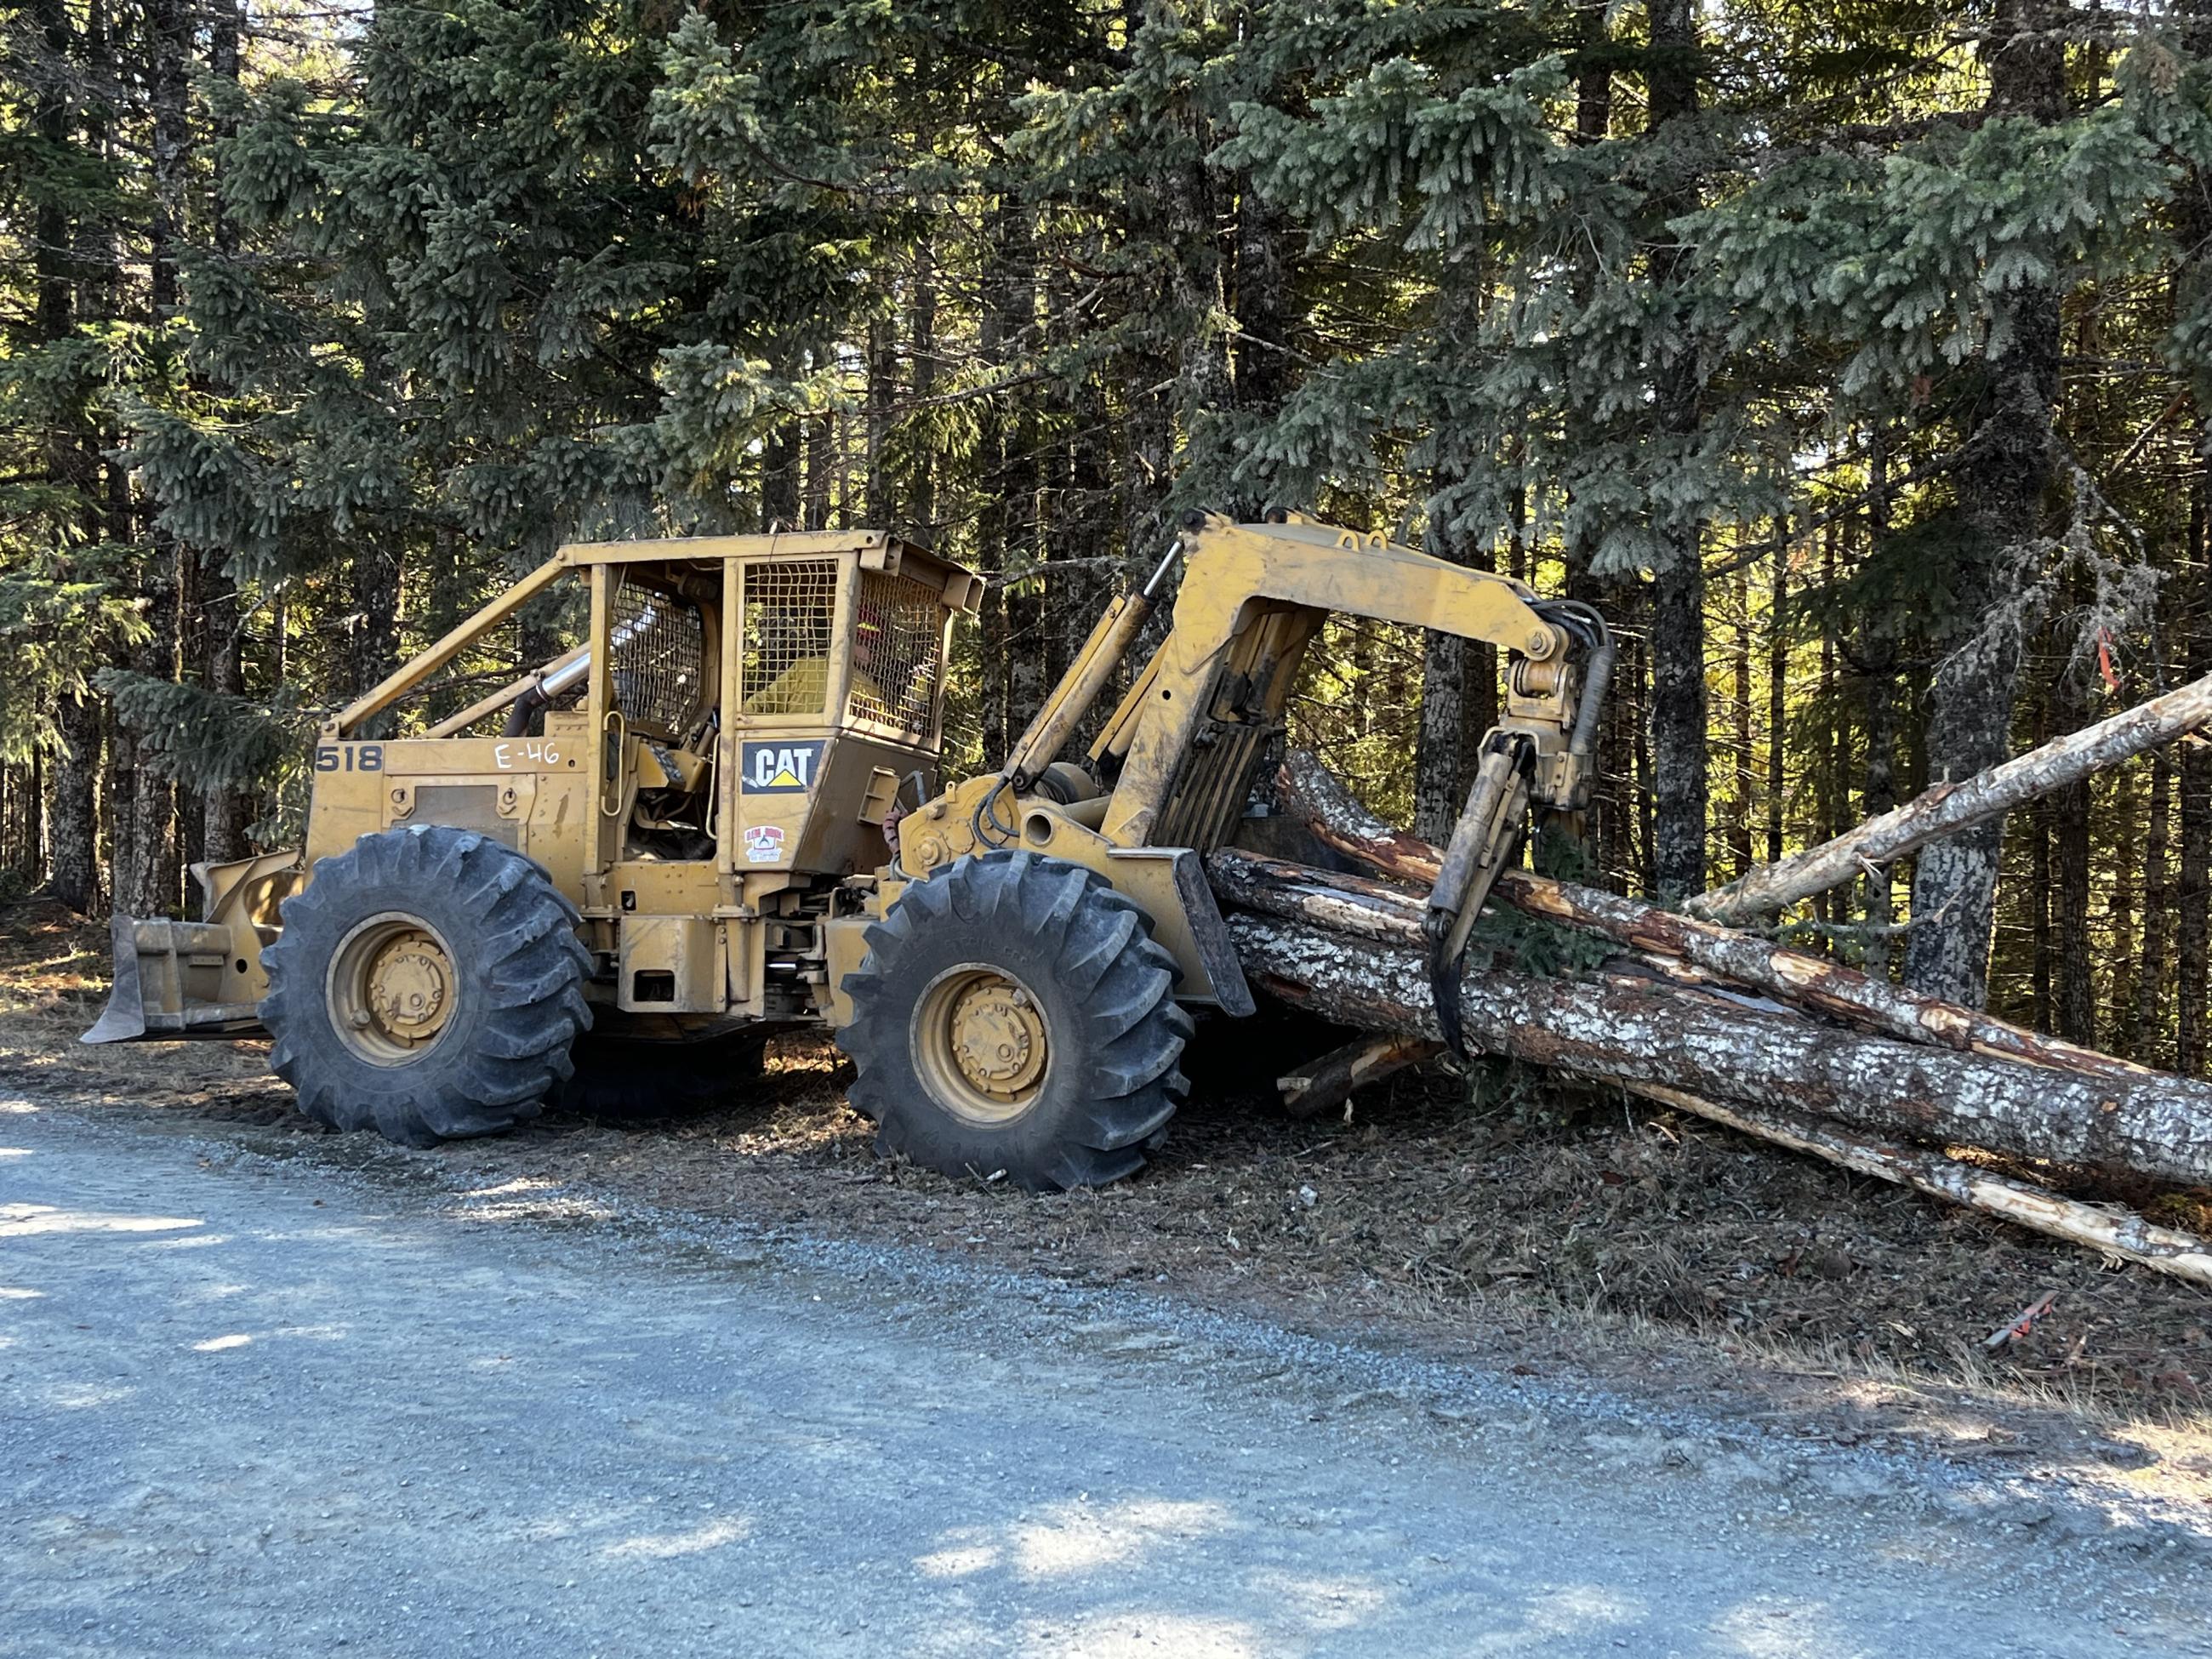 A grapple skidder, a large yellow piece of heavy equipment, bundles logs in a claw to move or stack them.